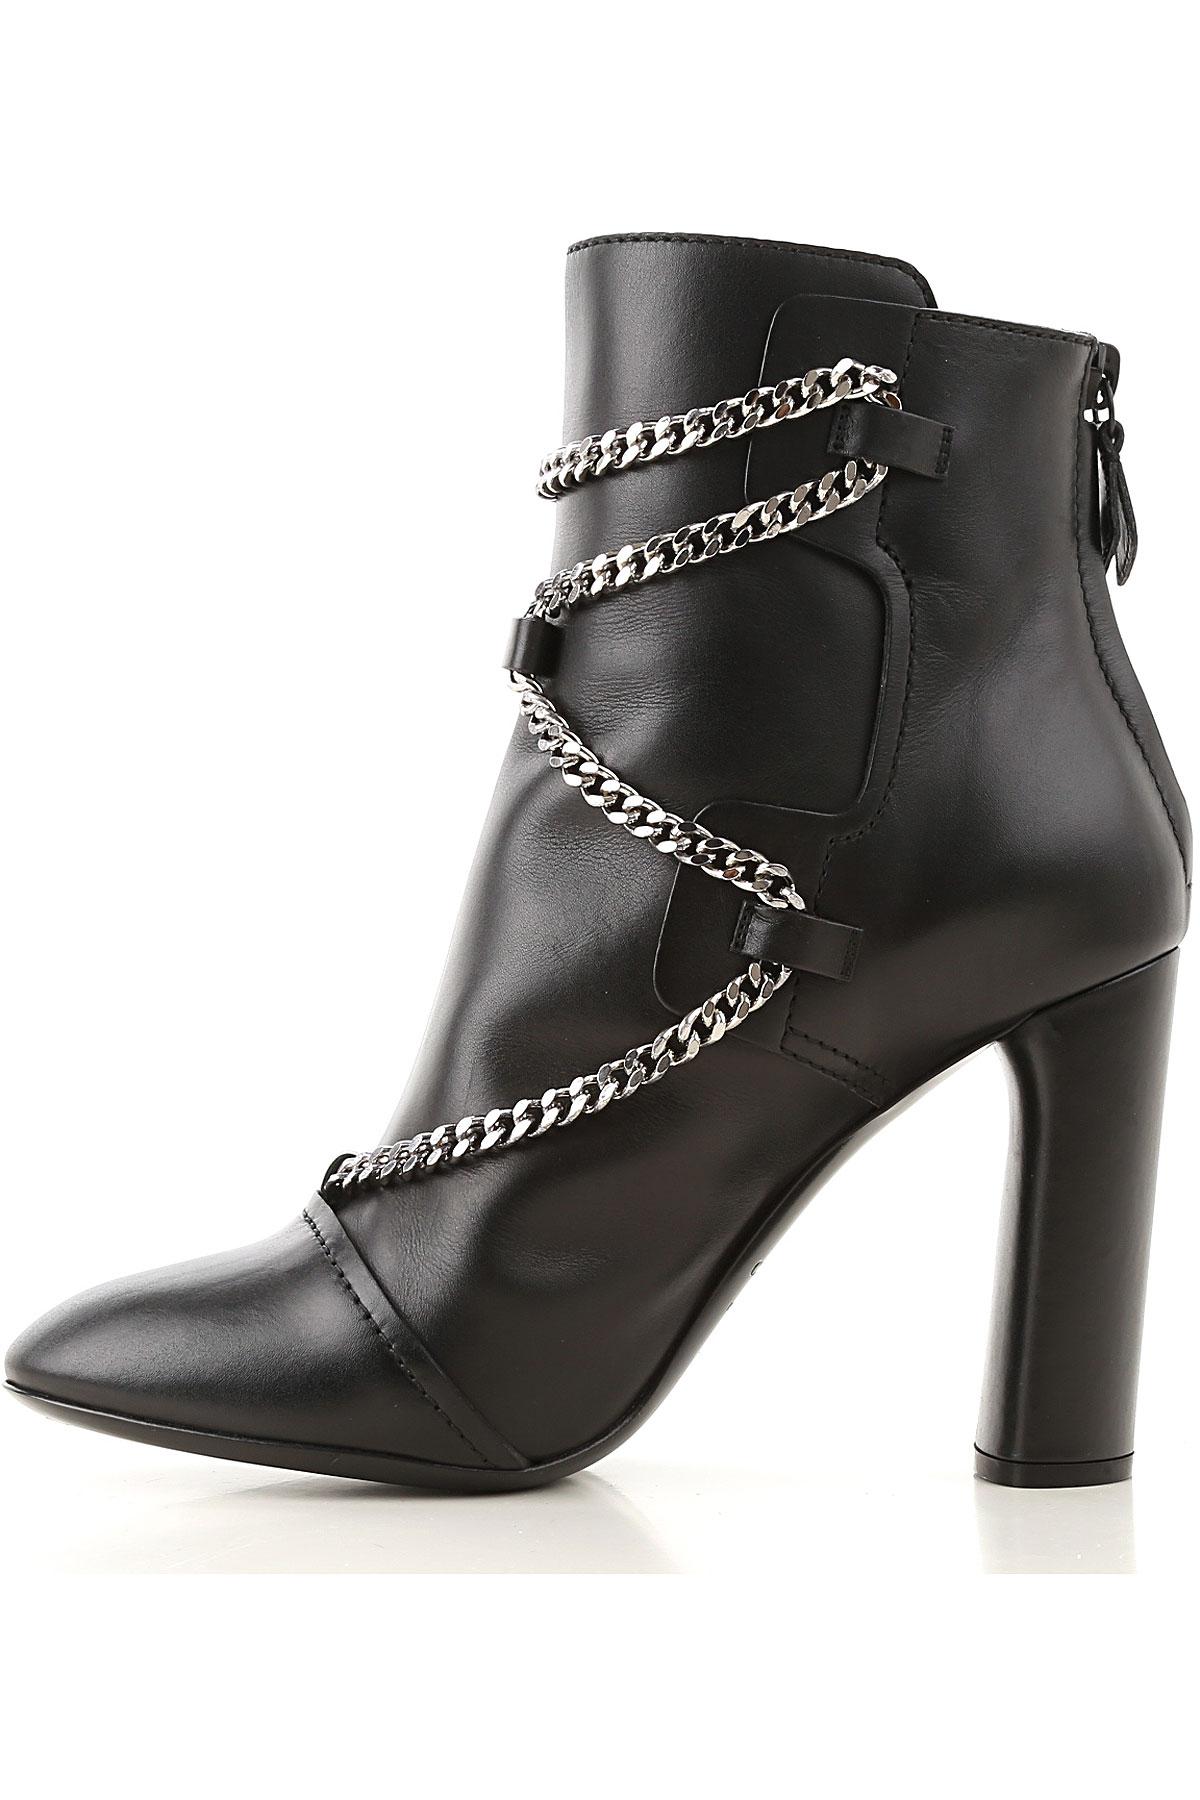 Casadei Leather Boots For Women in Black - Lyst